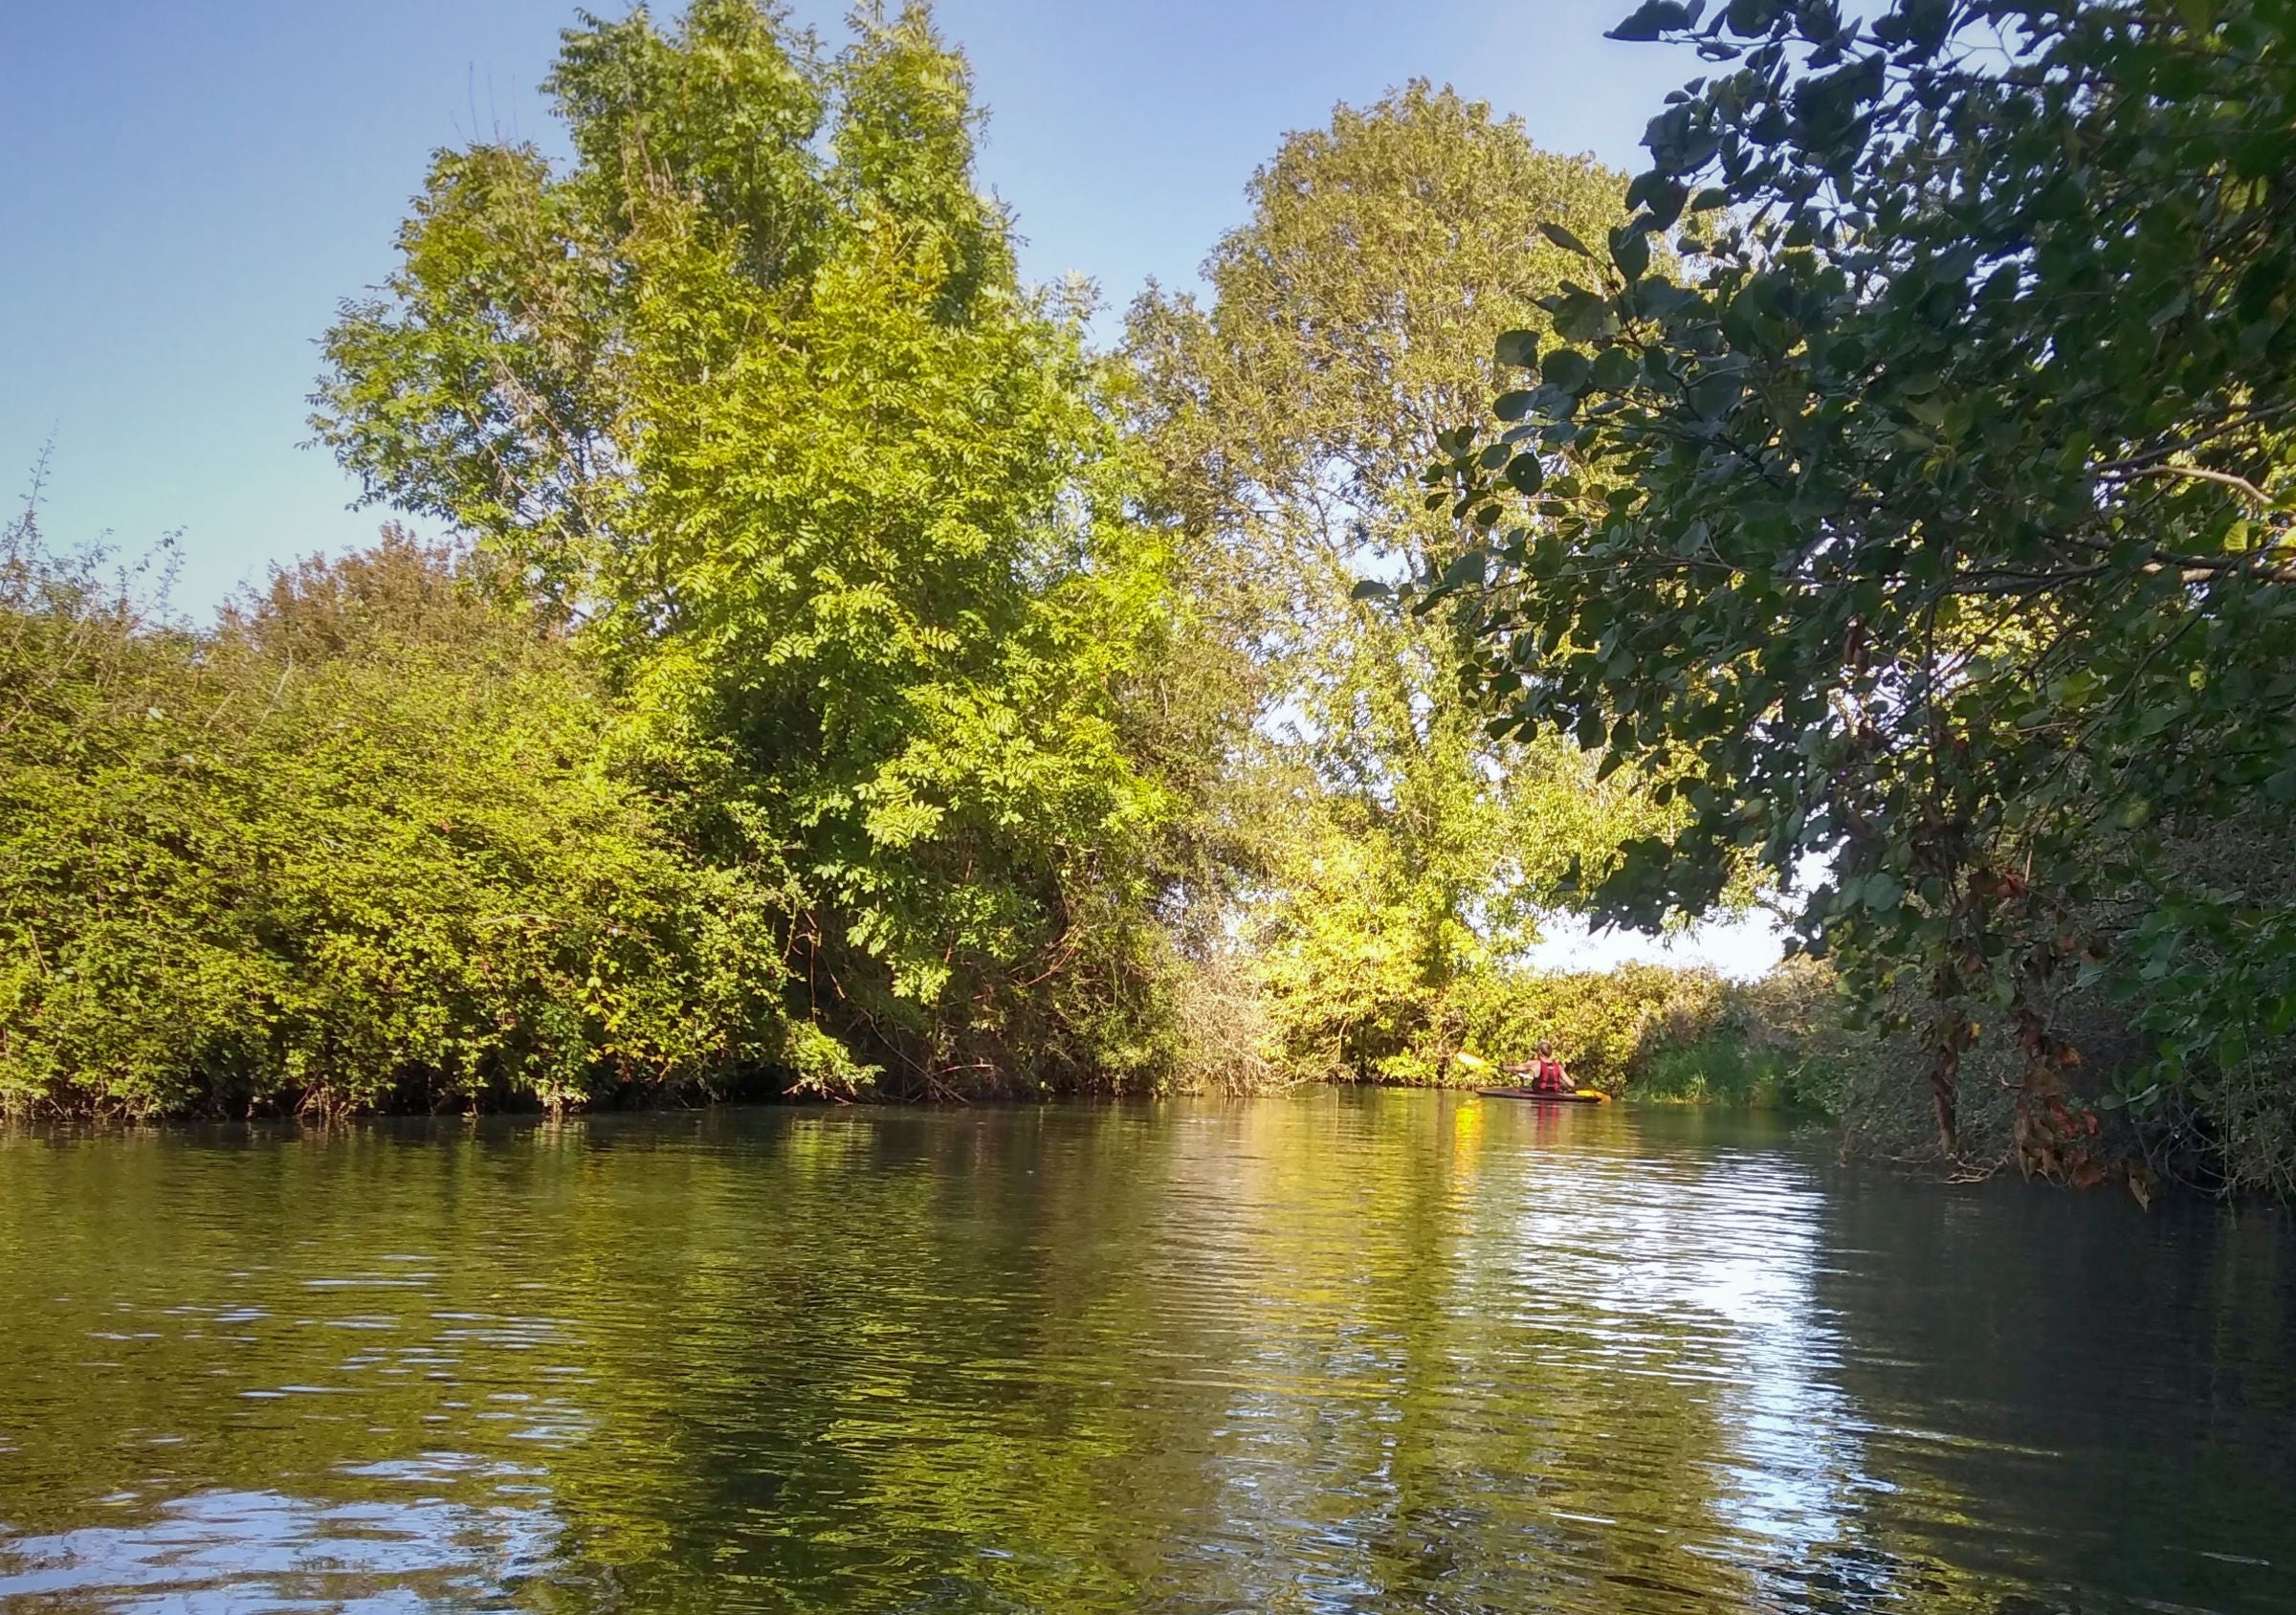 barcombe mills, river ouse, barcombe, paddling on the ouse, river walk